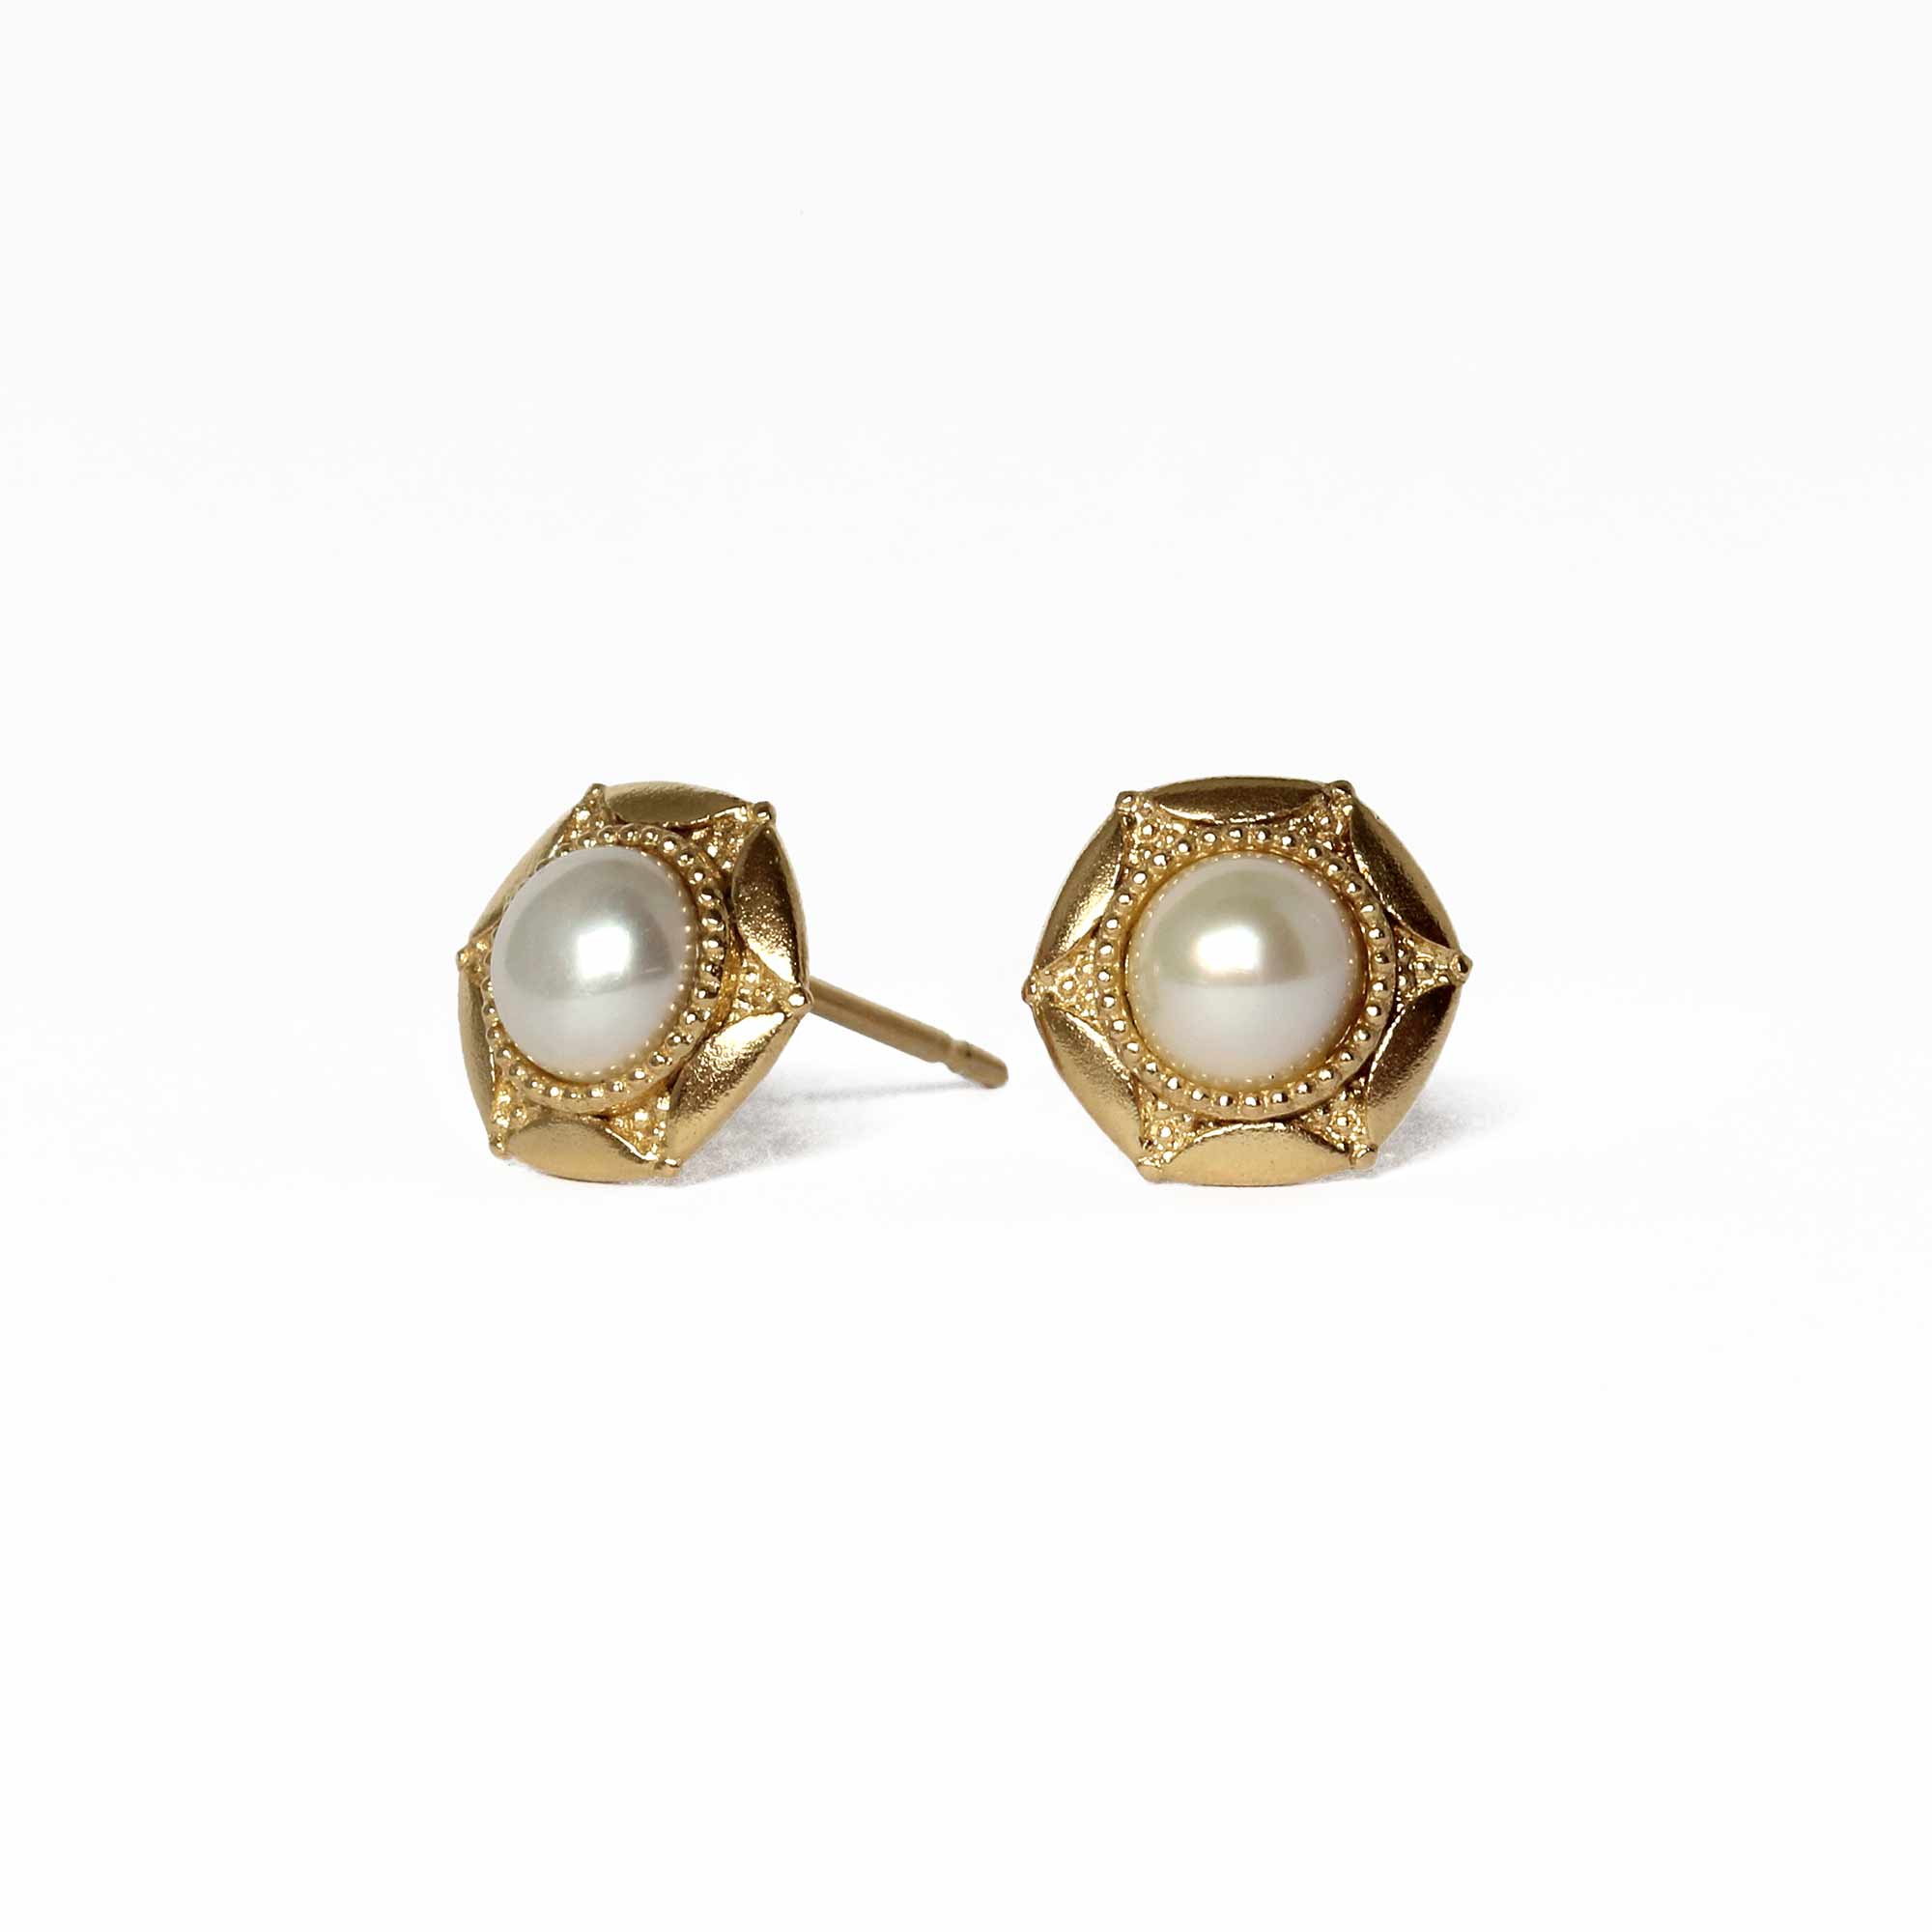 Statement textured gold pearl earrings, inspired by the moon. product shot on white background